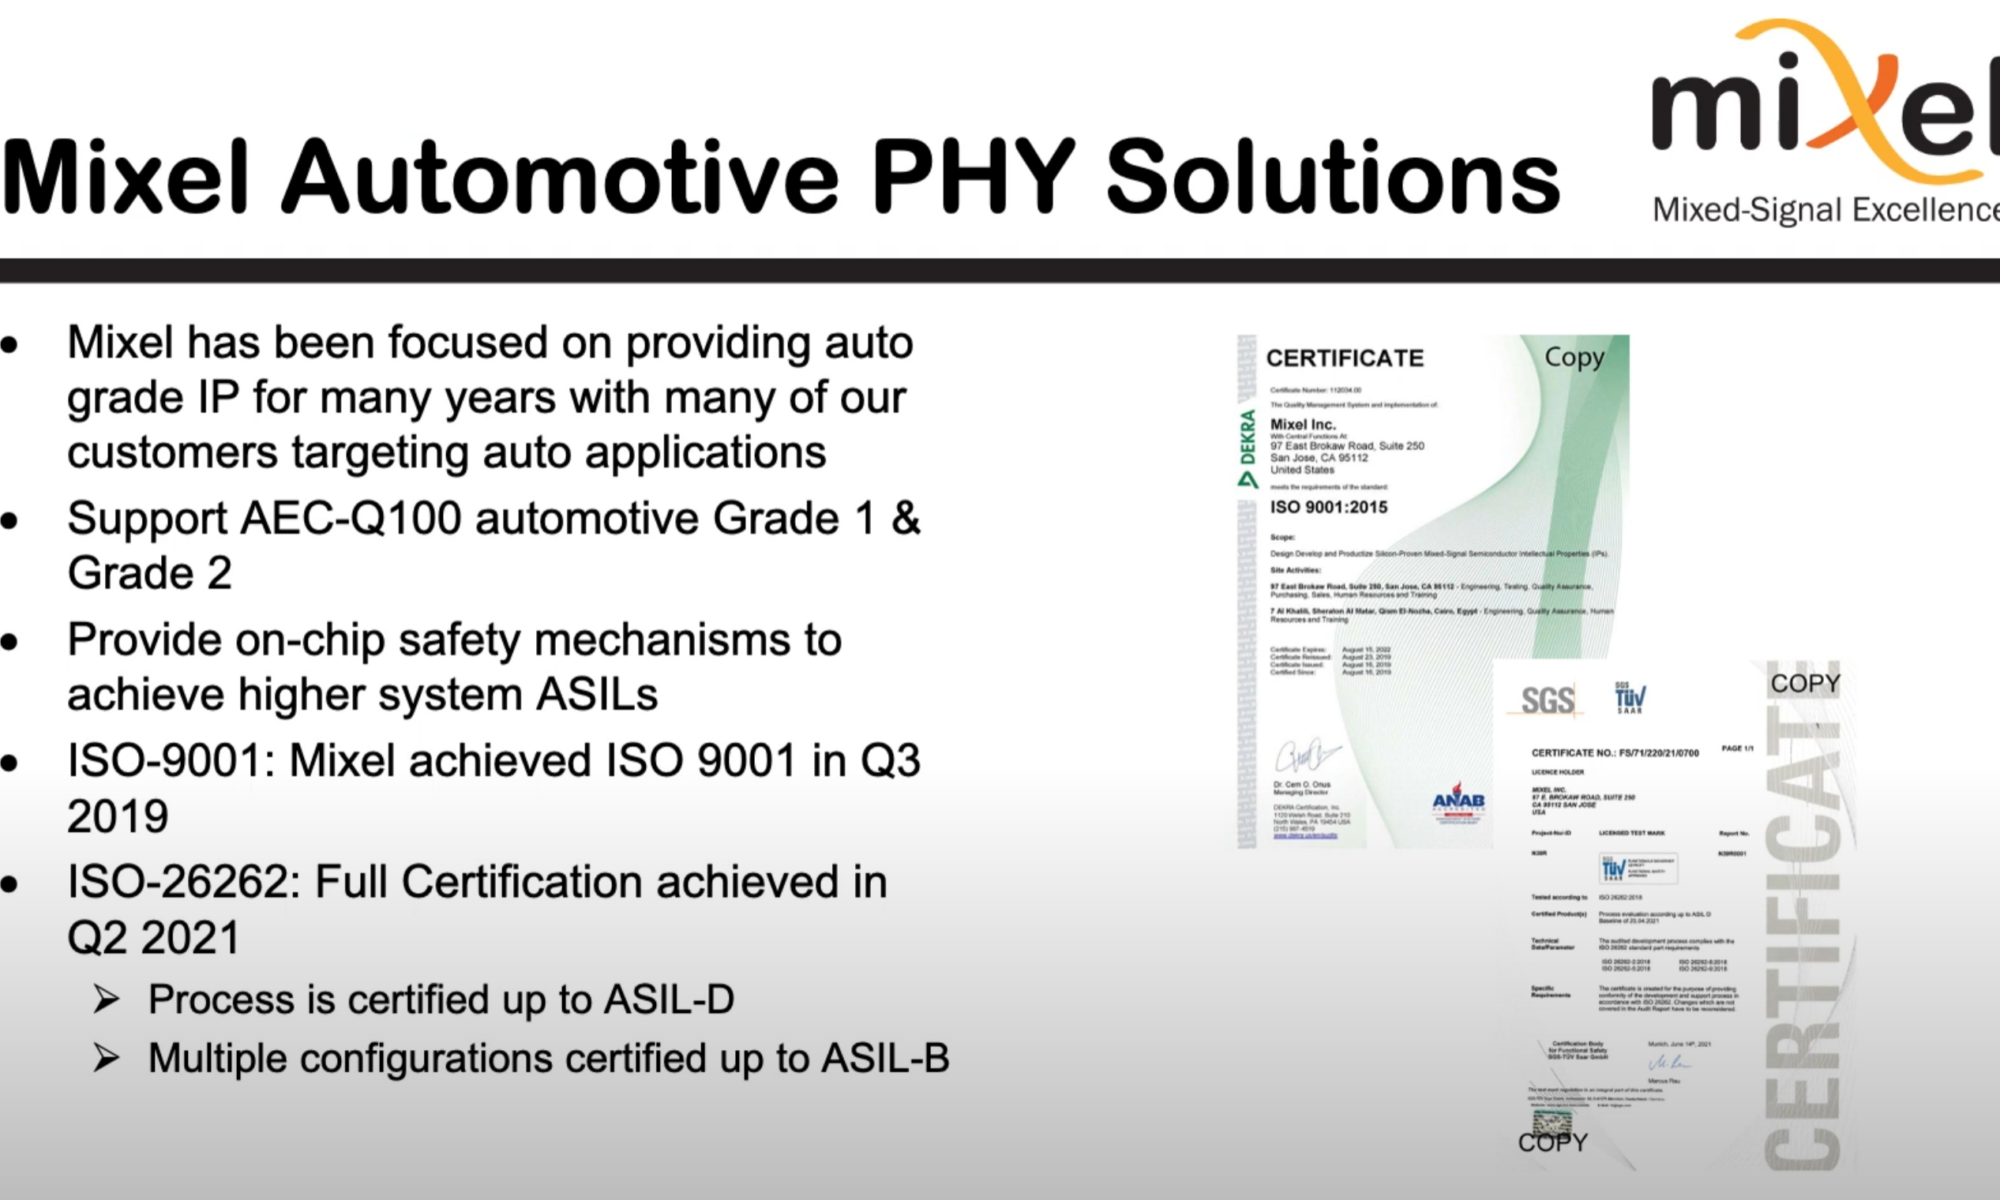 Mixel Automotive PHY Solutions